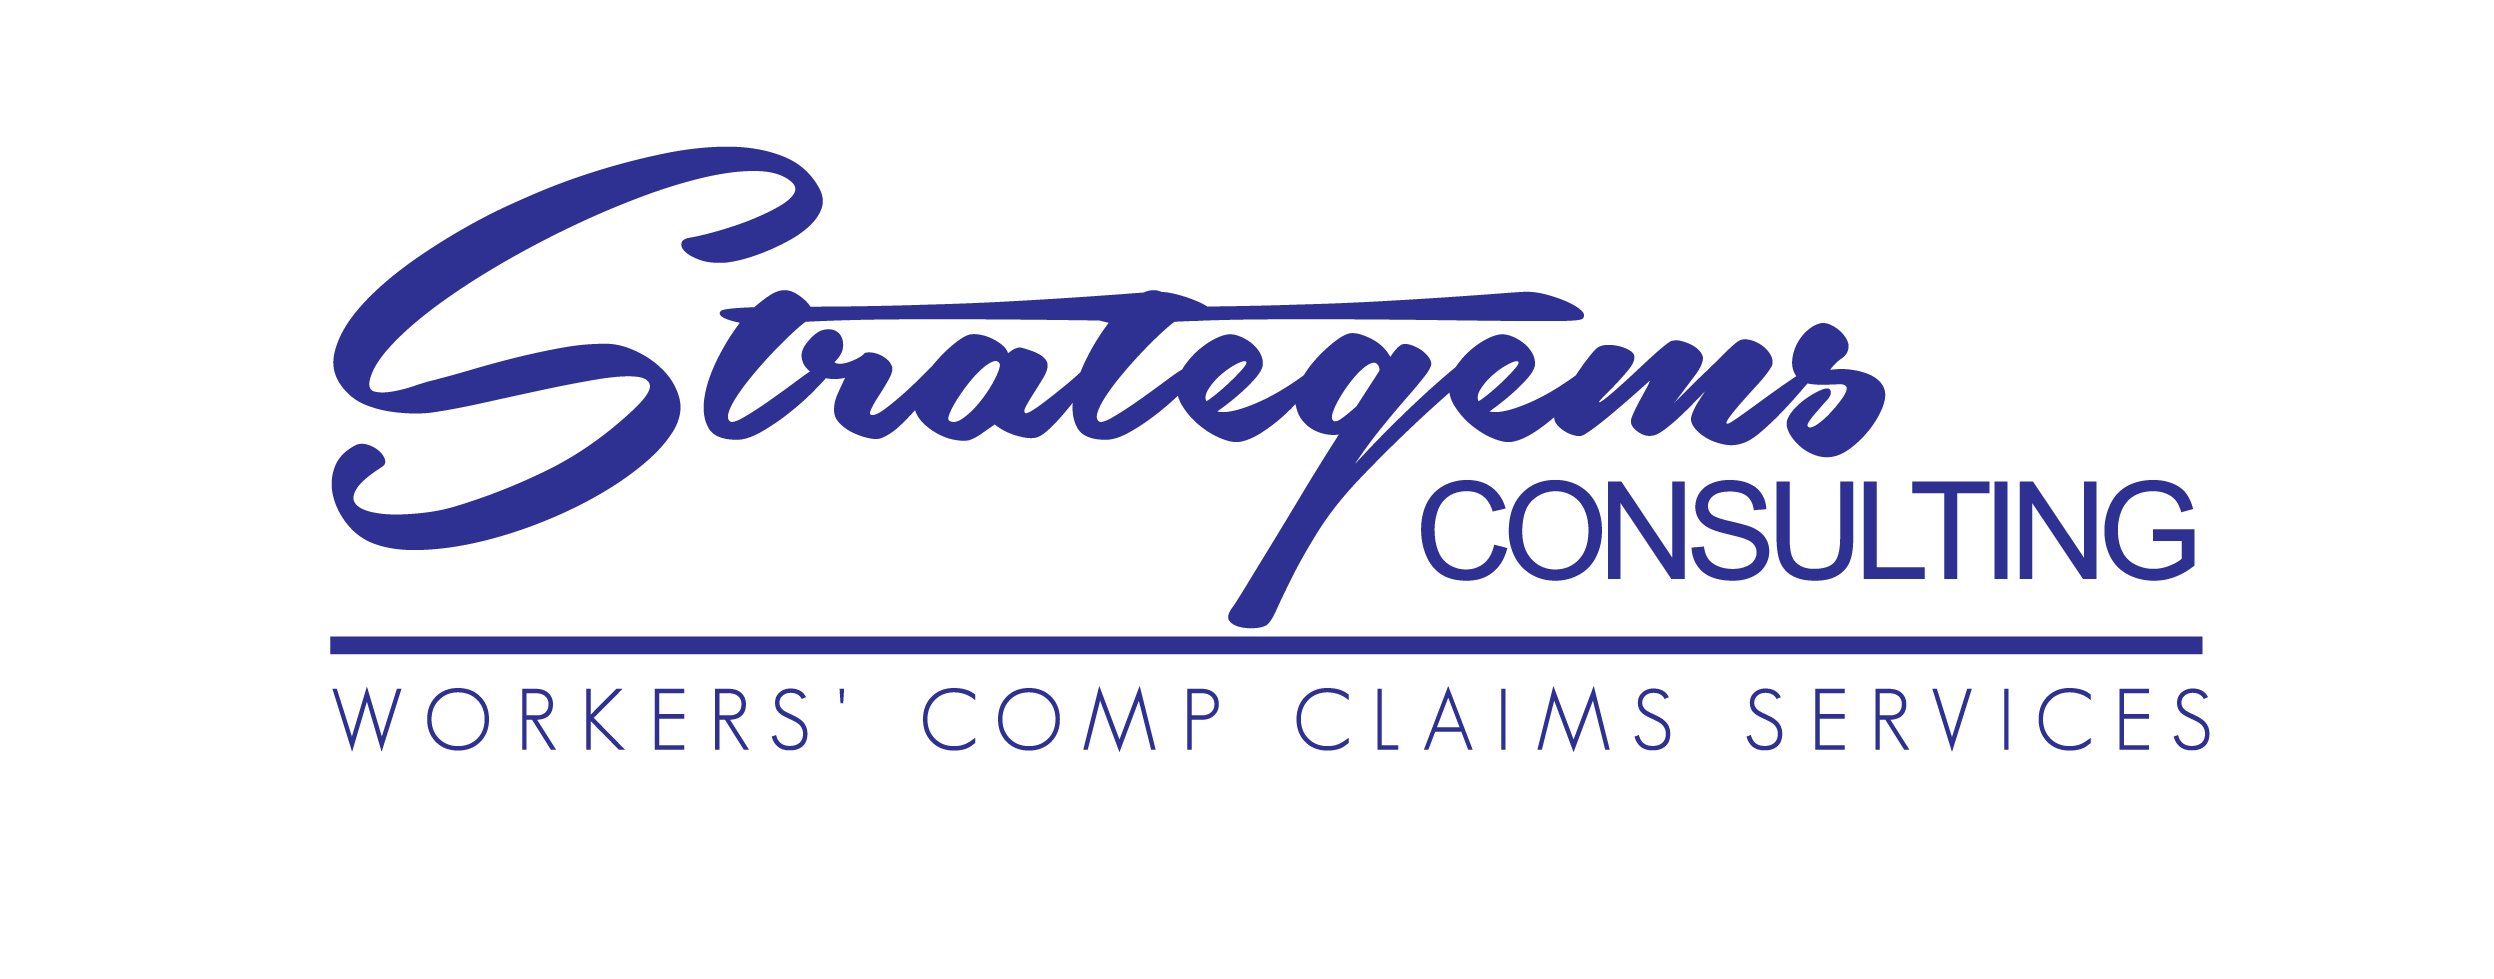 Strategems Consulting